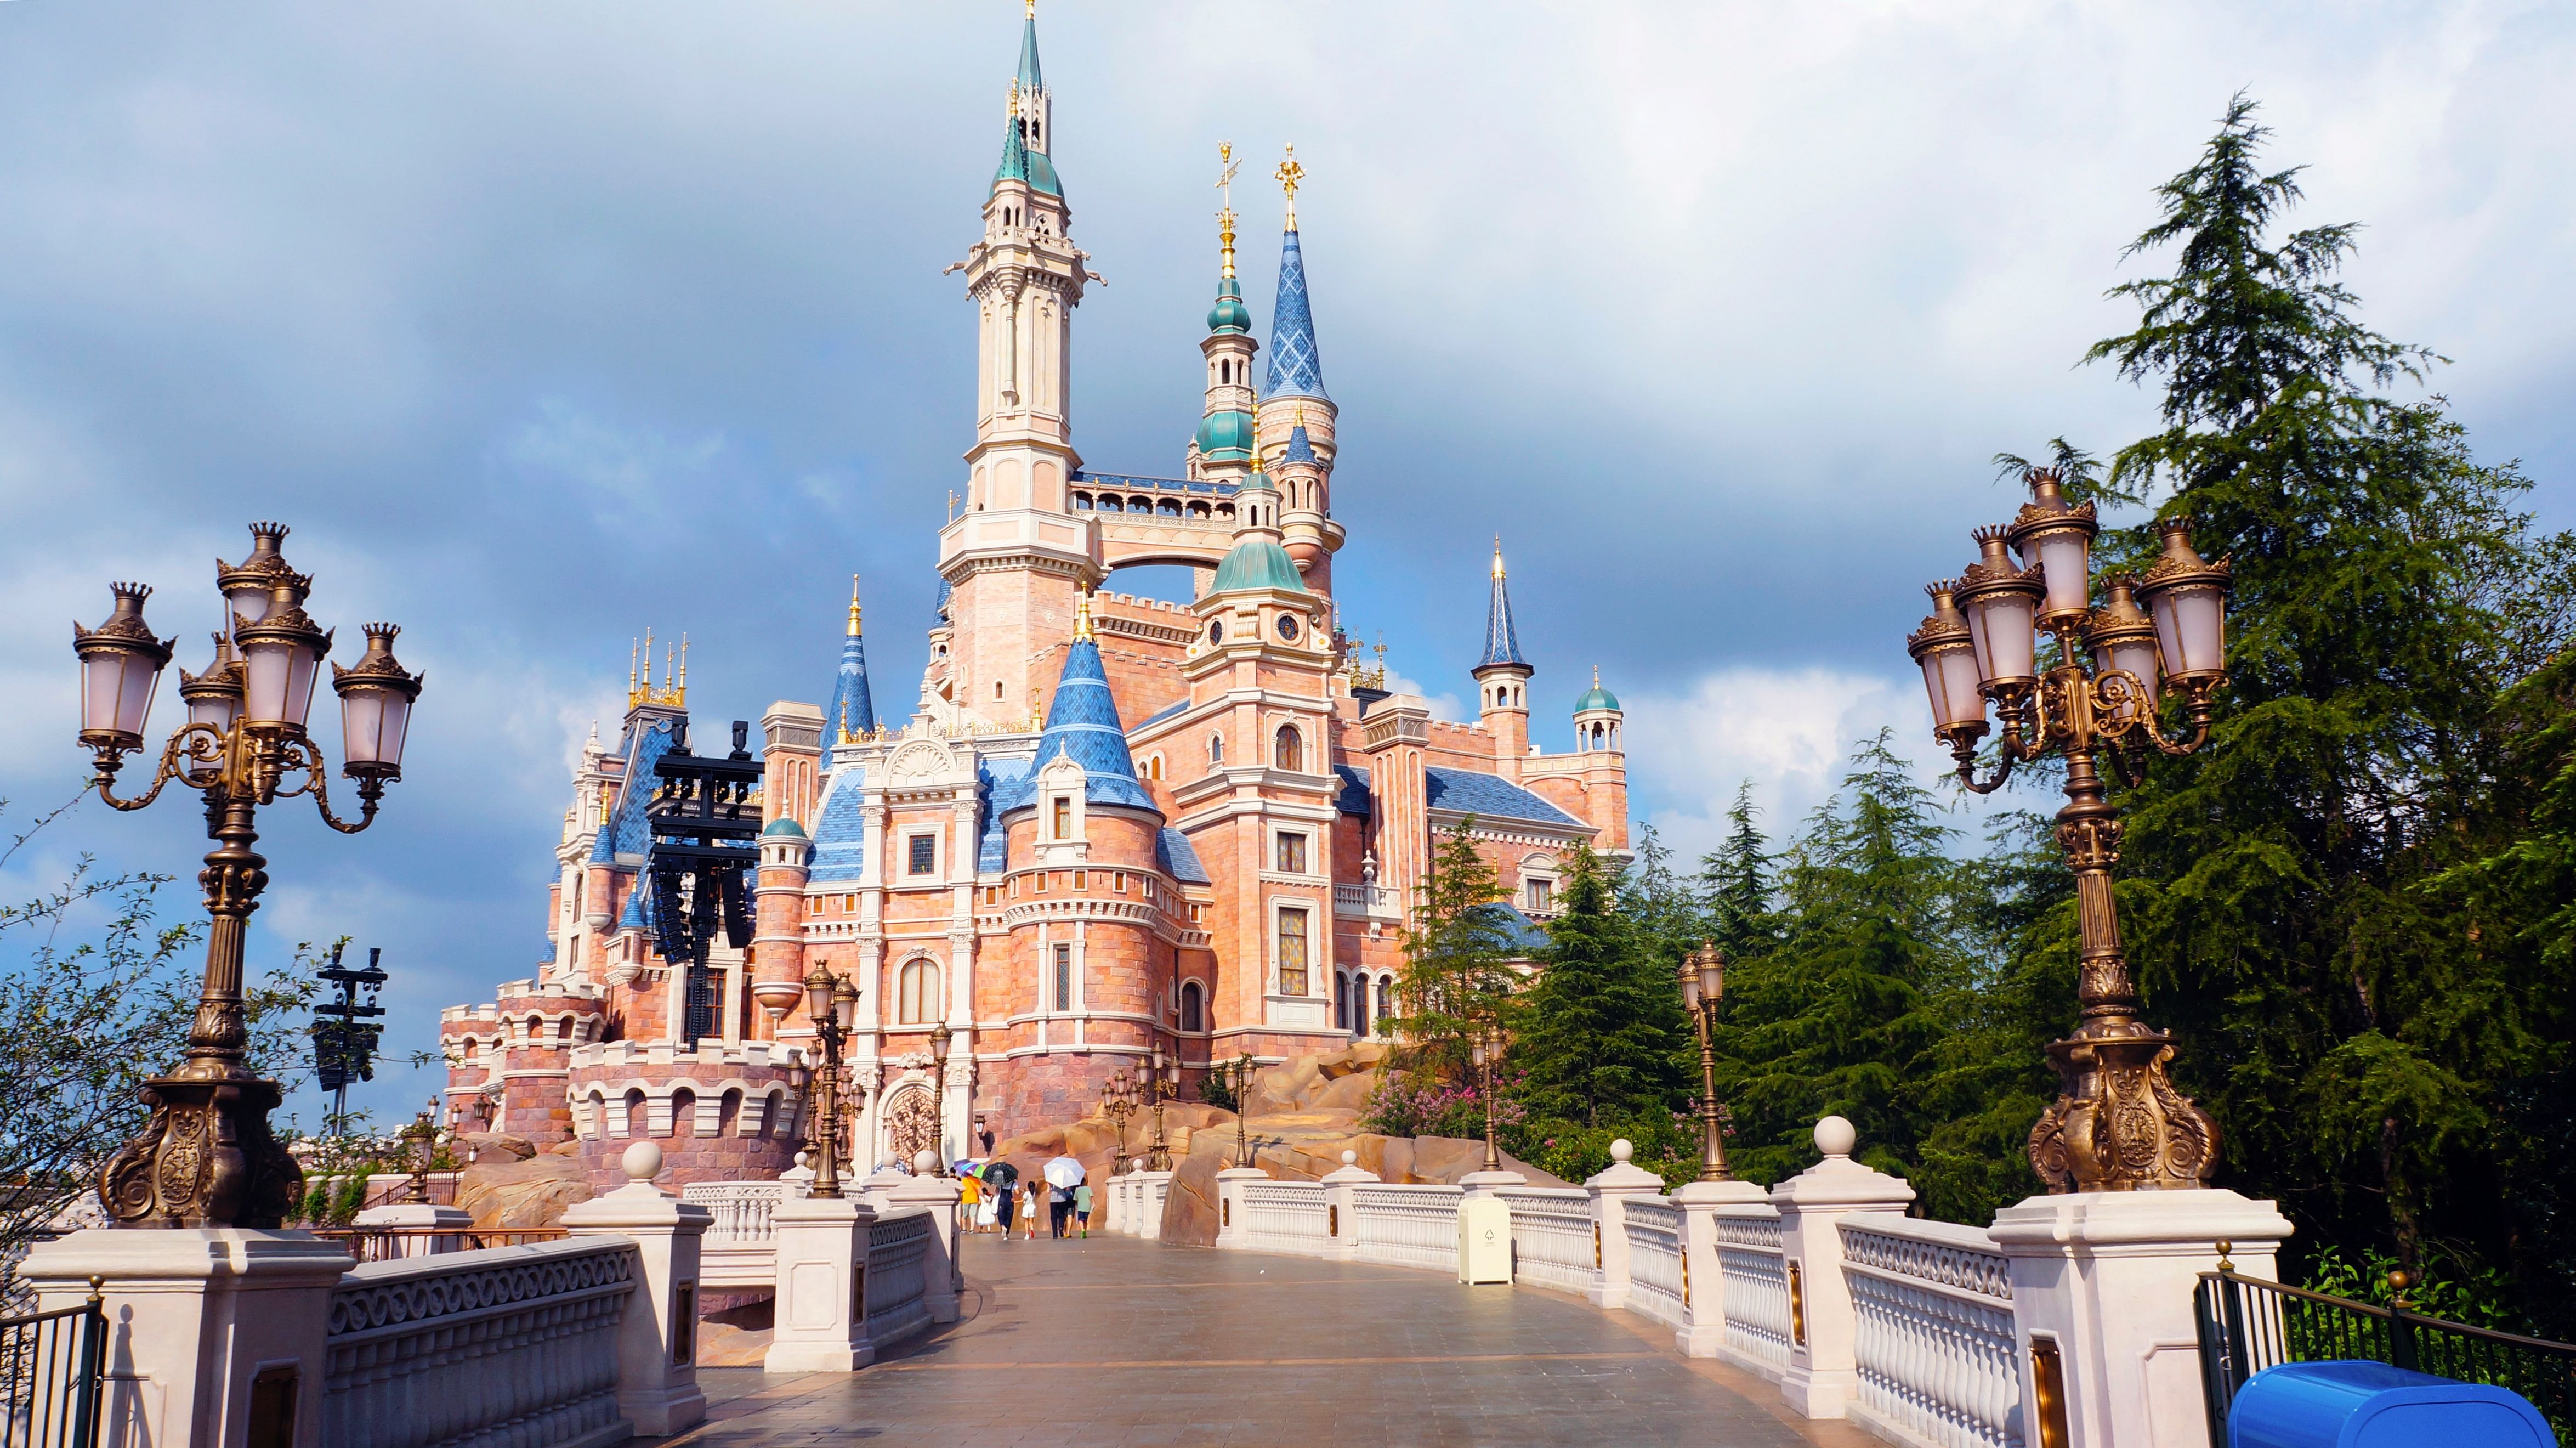 Disneyland or Disneysea 1-Day Ticket and Morning Ride from Tokyo Hotels